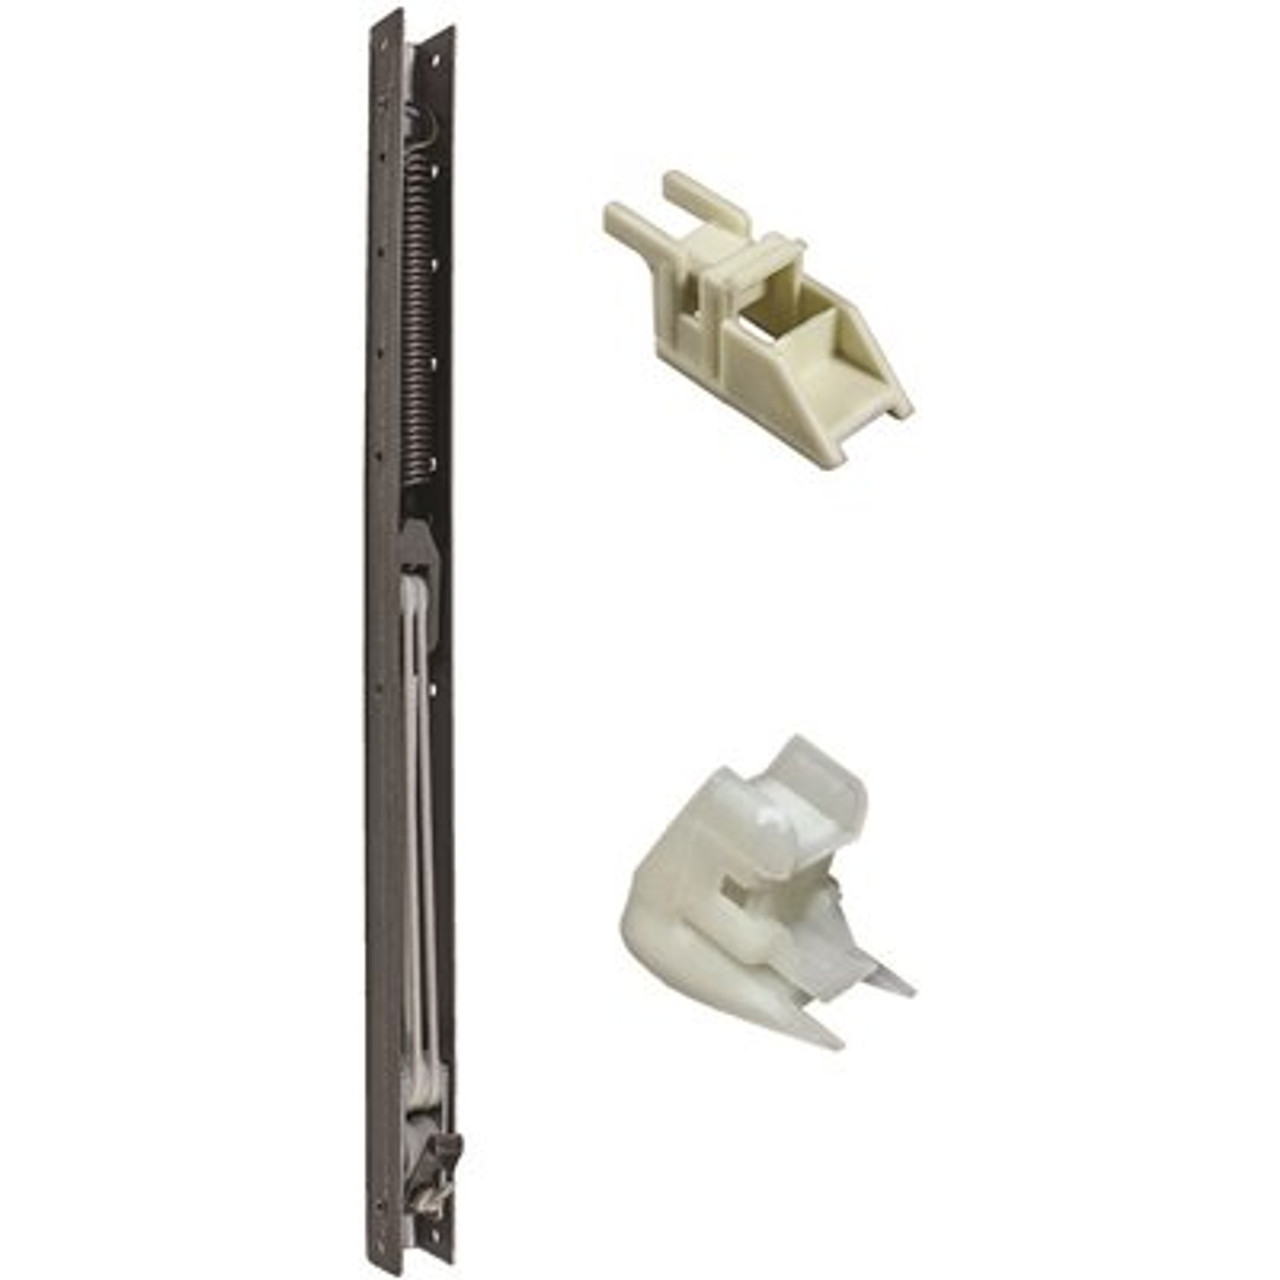 30 In. L Window Channel Balance 2930 With 9/16 In. W X 5/8 In. D Top And Bottom End Brackets Attached - 314413378